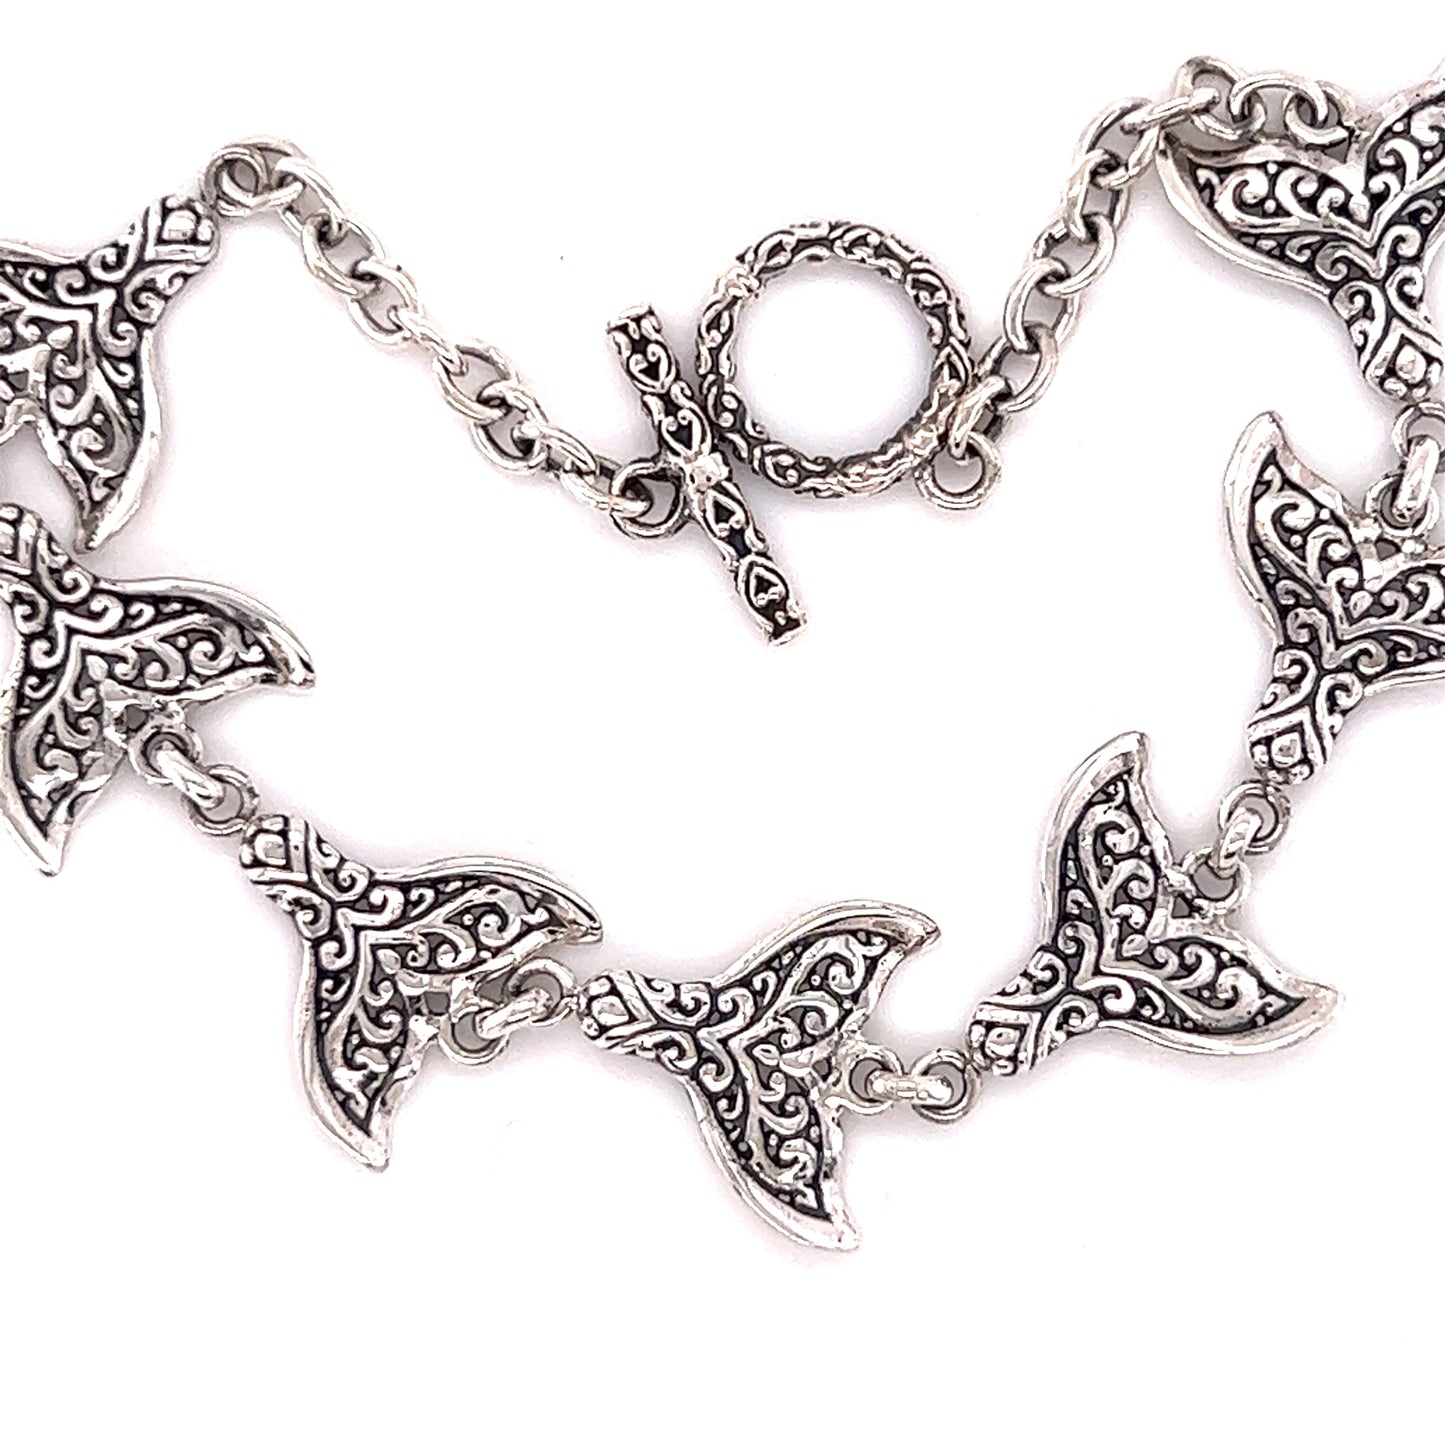 A Stunning Whale Tail Bracelet with ornate designs inspired by Santa Cruz oceanic motifs crafted by Super Silver.